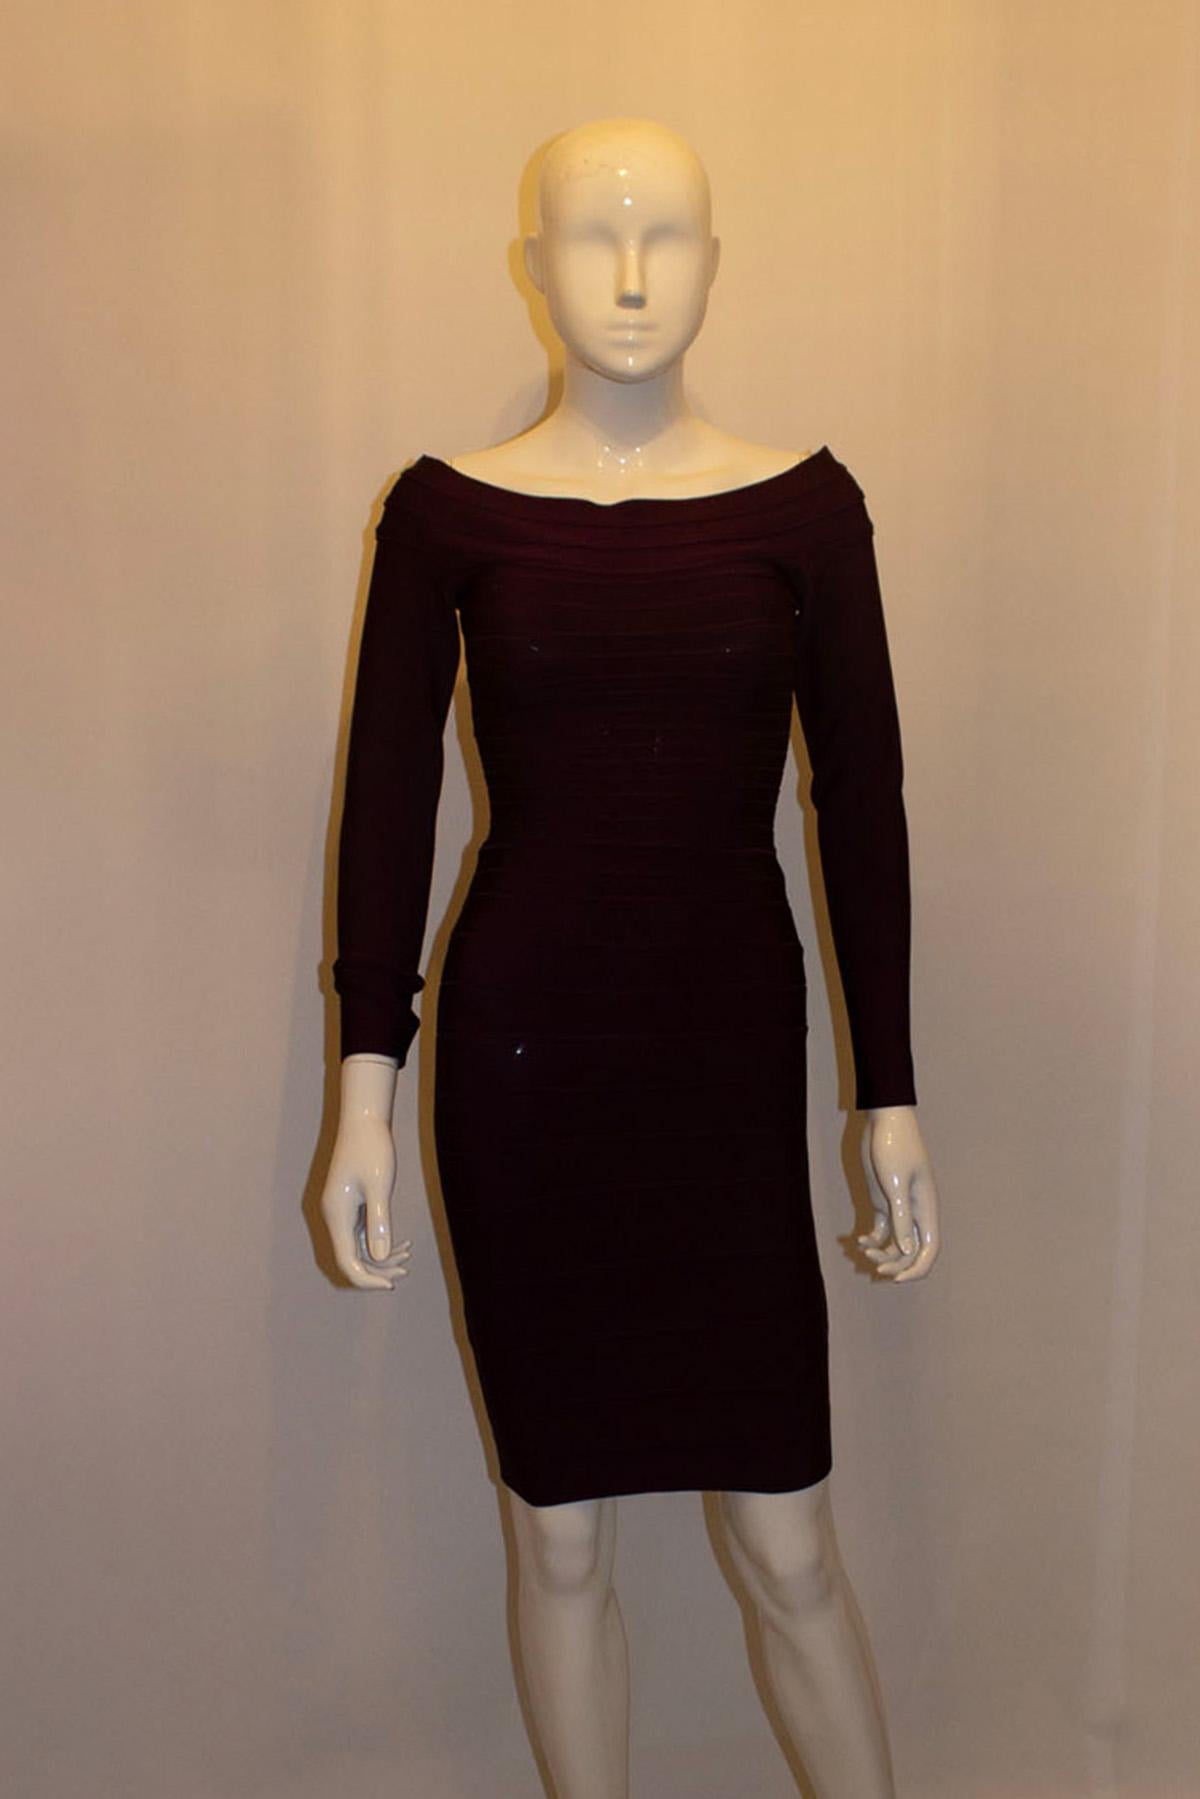 A chic dress for Fall. An aubergine colour dress by Herve Leger, number 00248958. The dress has a boat neckline, central back zip and long sleeves.
Size xs, measurements Bust up to 33'', length 35''